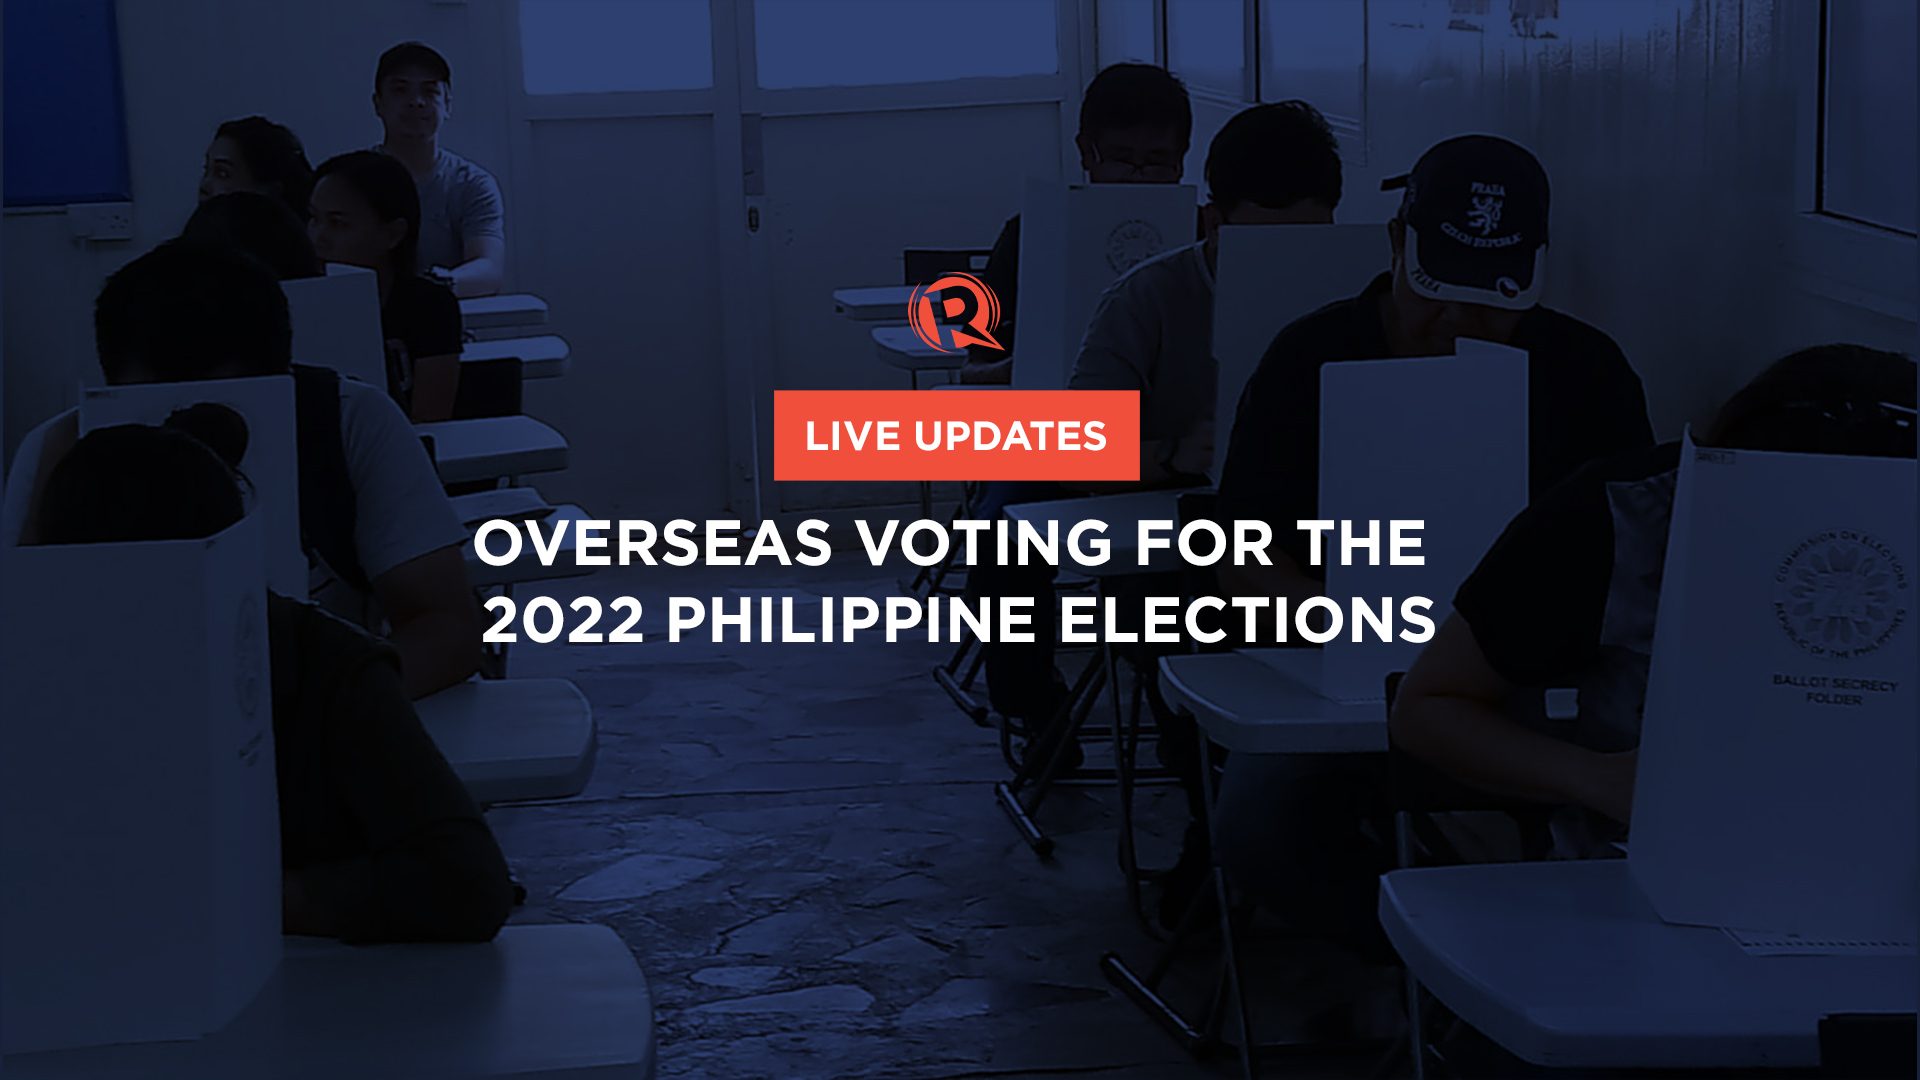 LIVE UPDATES: Overseas voting for the 2022 Philippine elections